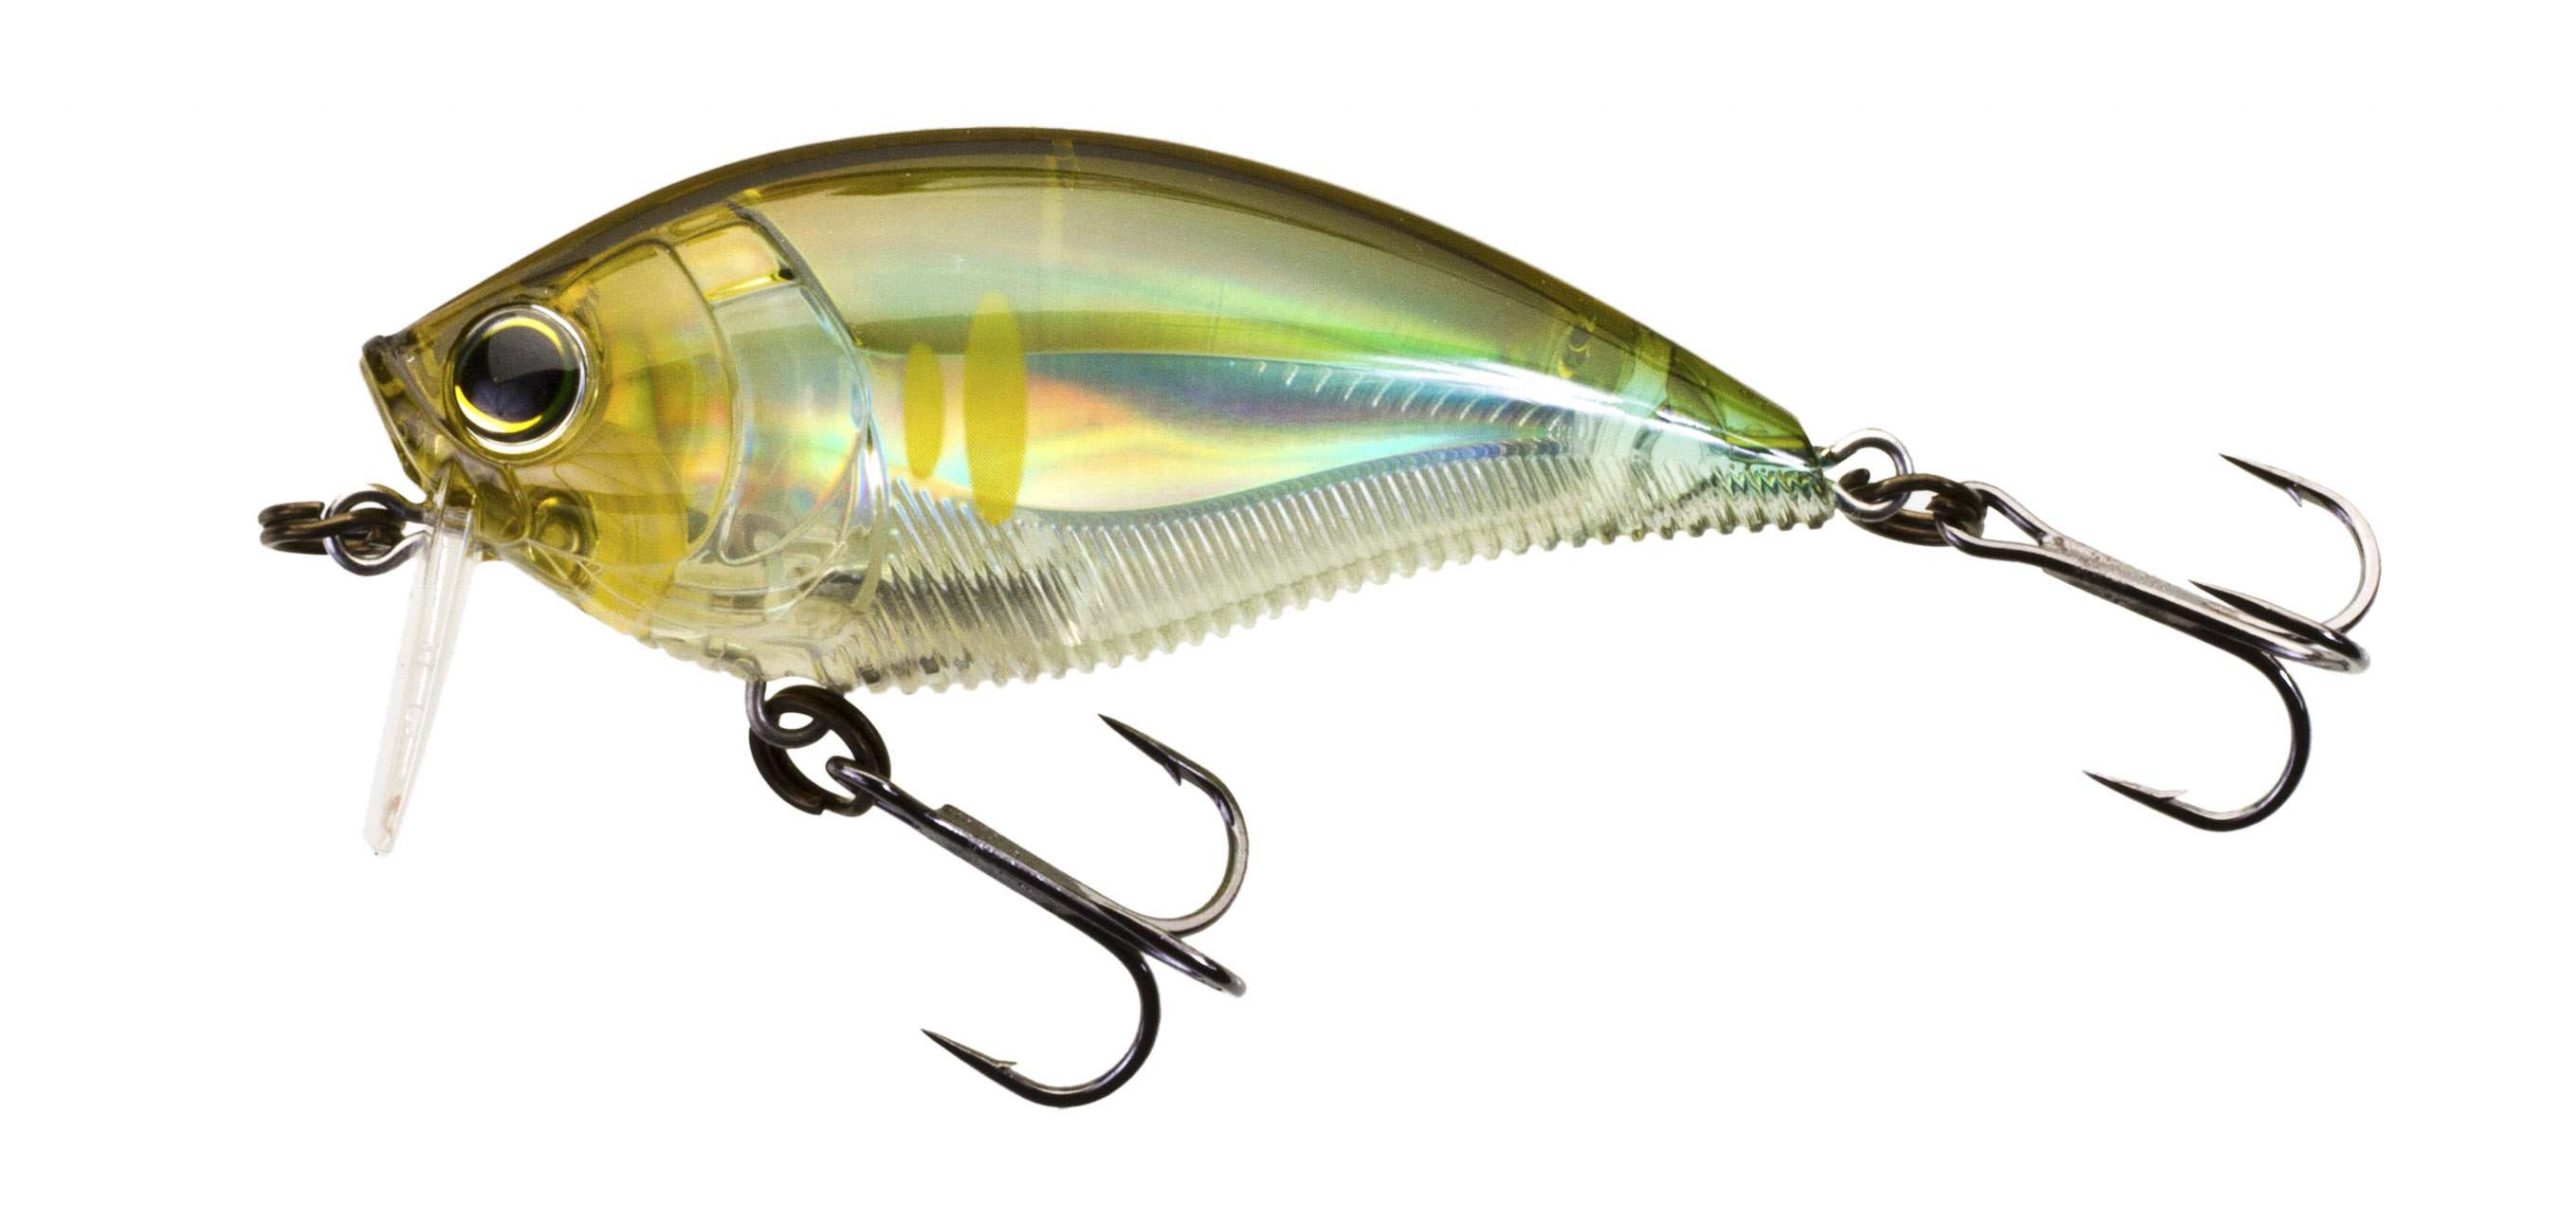 <b>YO-ZURI 3DB</b>
This is not a new bait from Yo-Zuri, but a series of baits that includes two patented features. First is a 3-D Internal Prism, which sends reflected light from the bait to elicit strikes. The second patented feature is the Wave-Motion Vibration Ribs. This ribbed belly is said to create multiple and distinct vibrations that fish can detect with lateral lines. The series includes the Crayfish, Wake Bait, Flat Crank and Vibe, each retailing for $9.99.